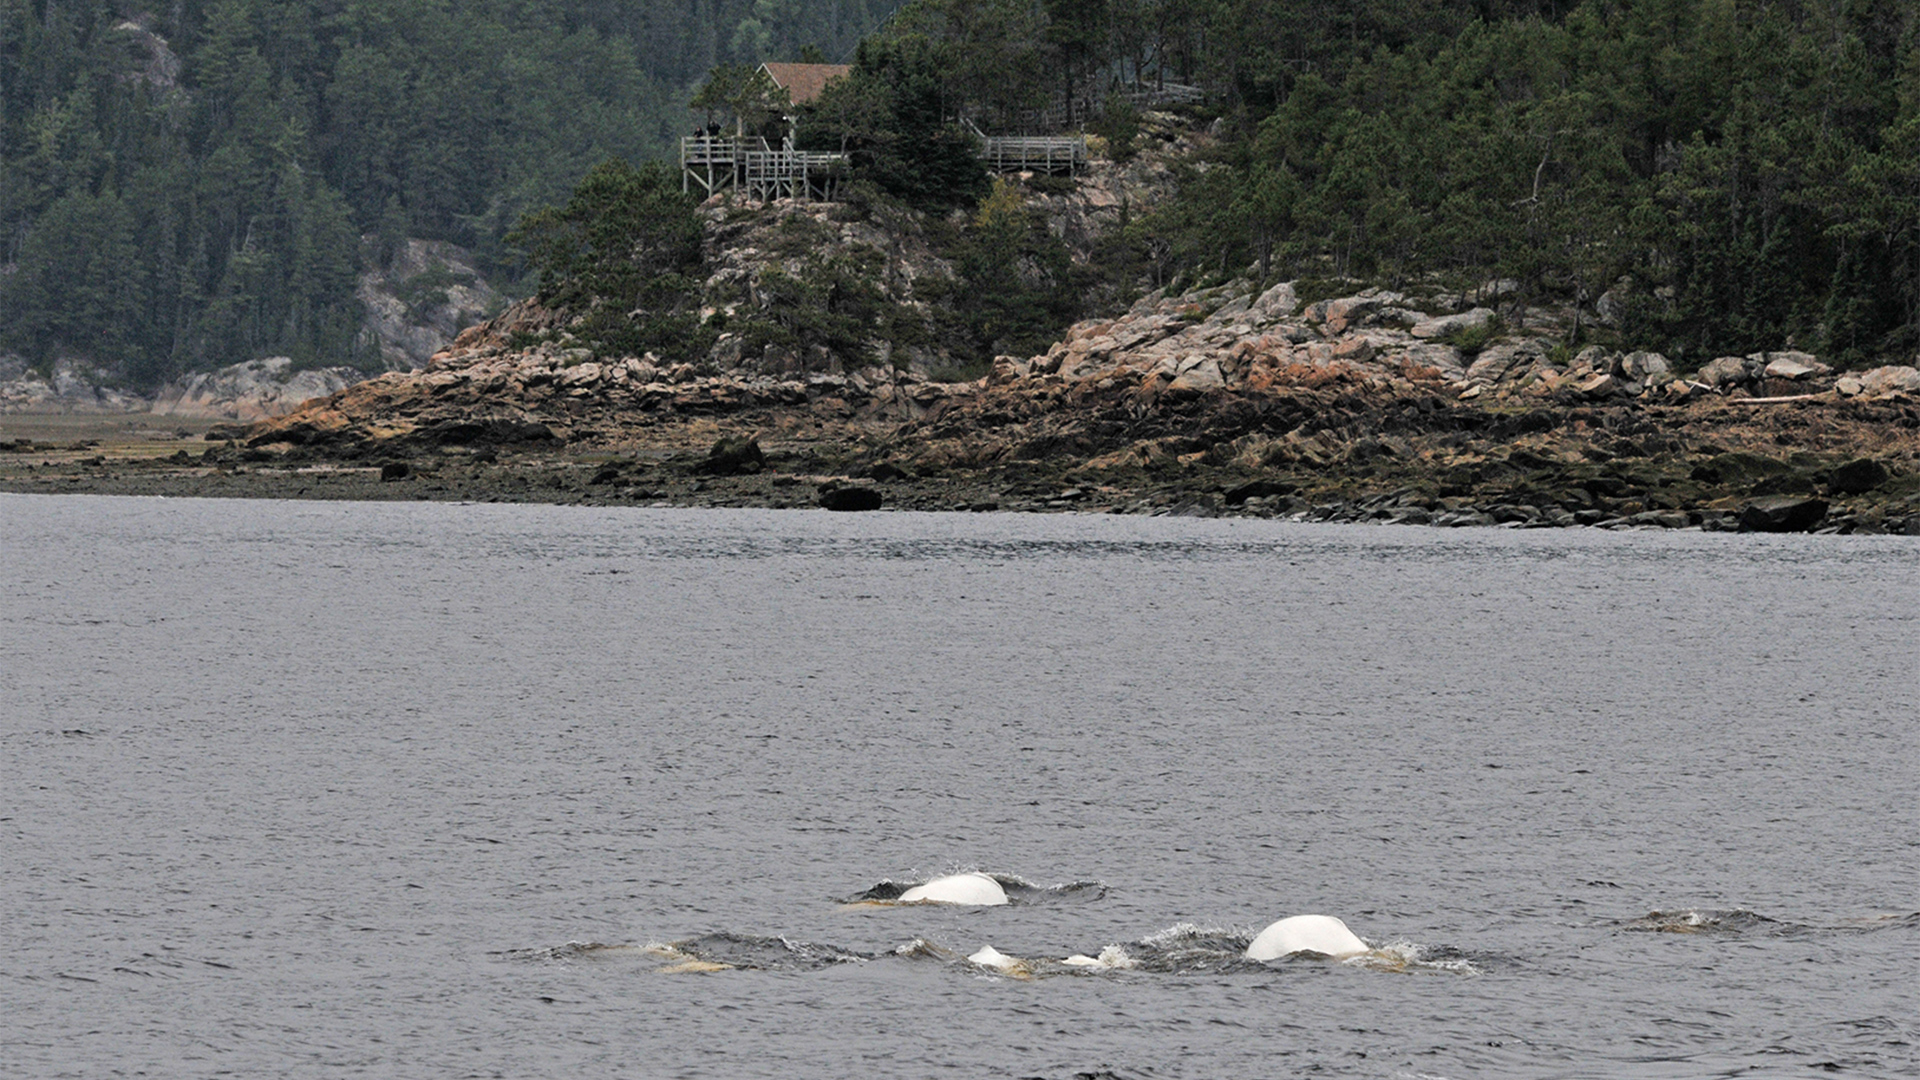 The white backs of two belugas appear, two are visible through the clear water and two more barely pierce the surface. They are swimming near a rocky shore.